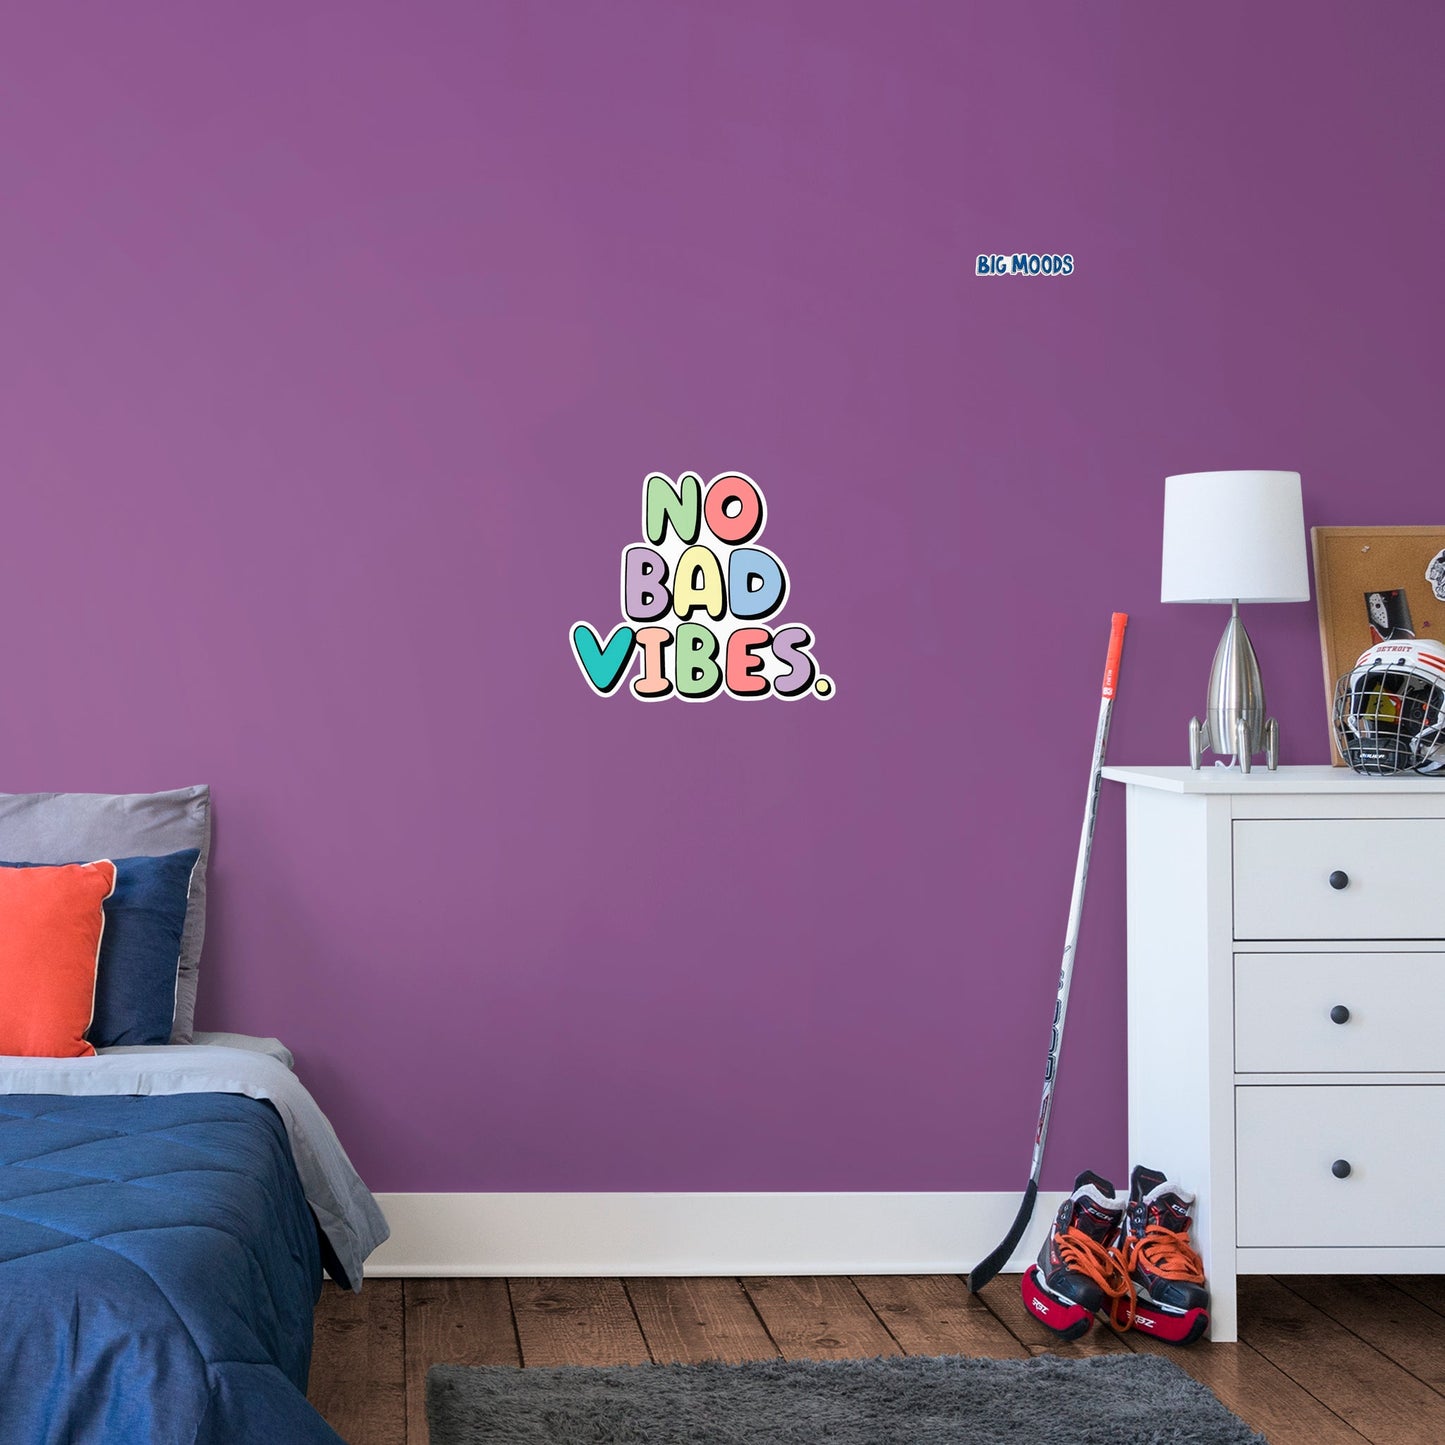 No Bad Vibes (Multi-Color)        - Officially Licensed Big Moods Removable     Adhesive Decal